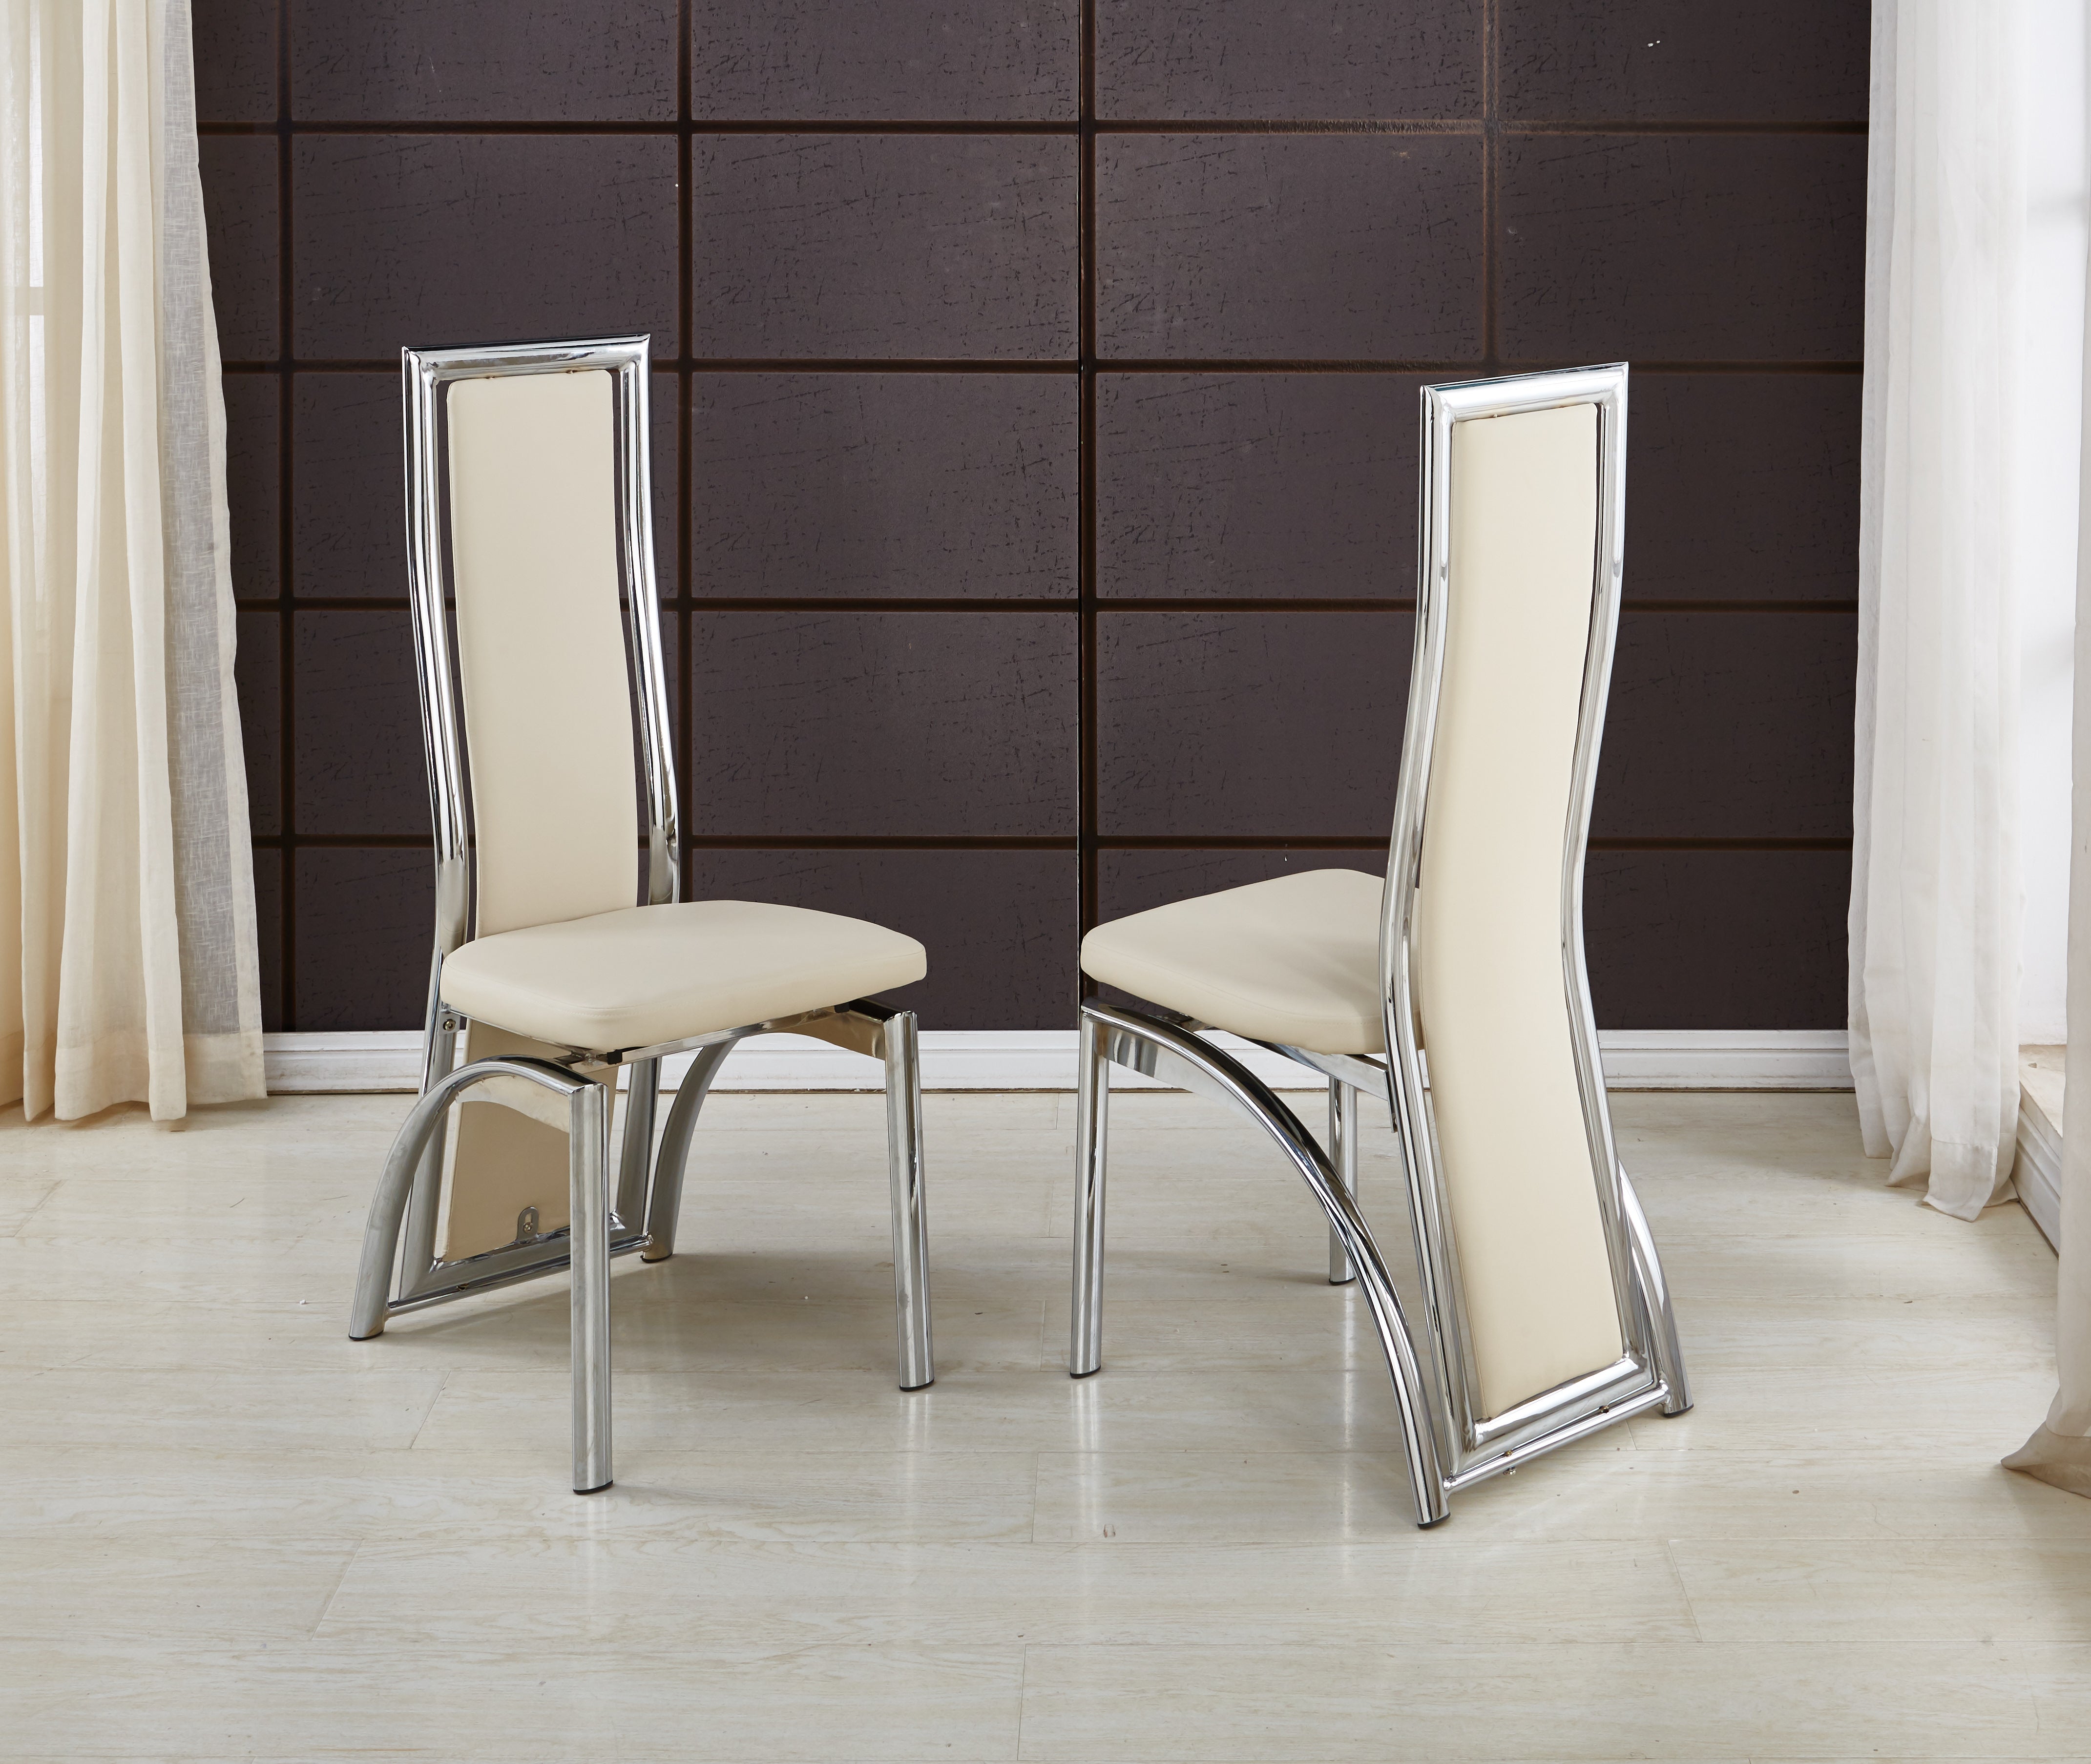 Venus Faux Leather Foam Padded High Back Dining Chairs Solid Chrome Fr Modernique